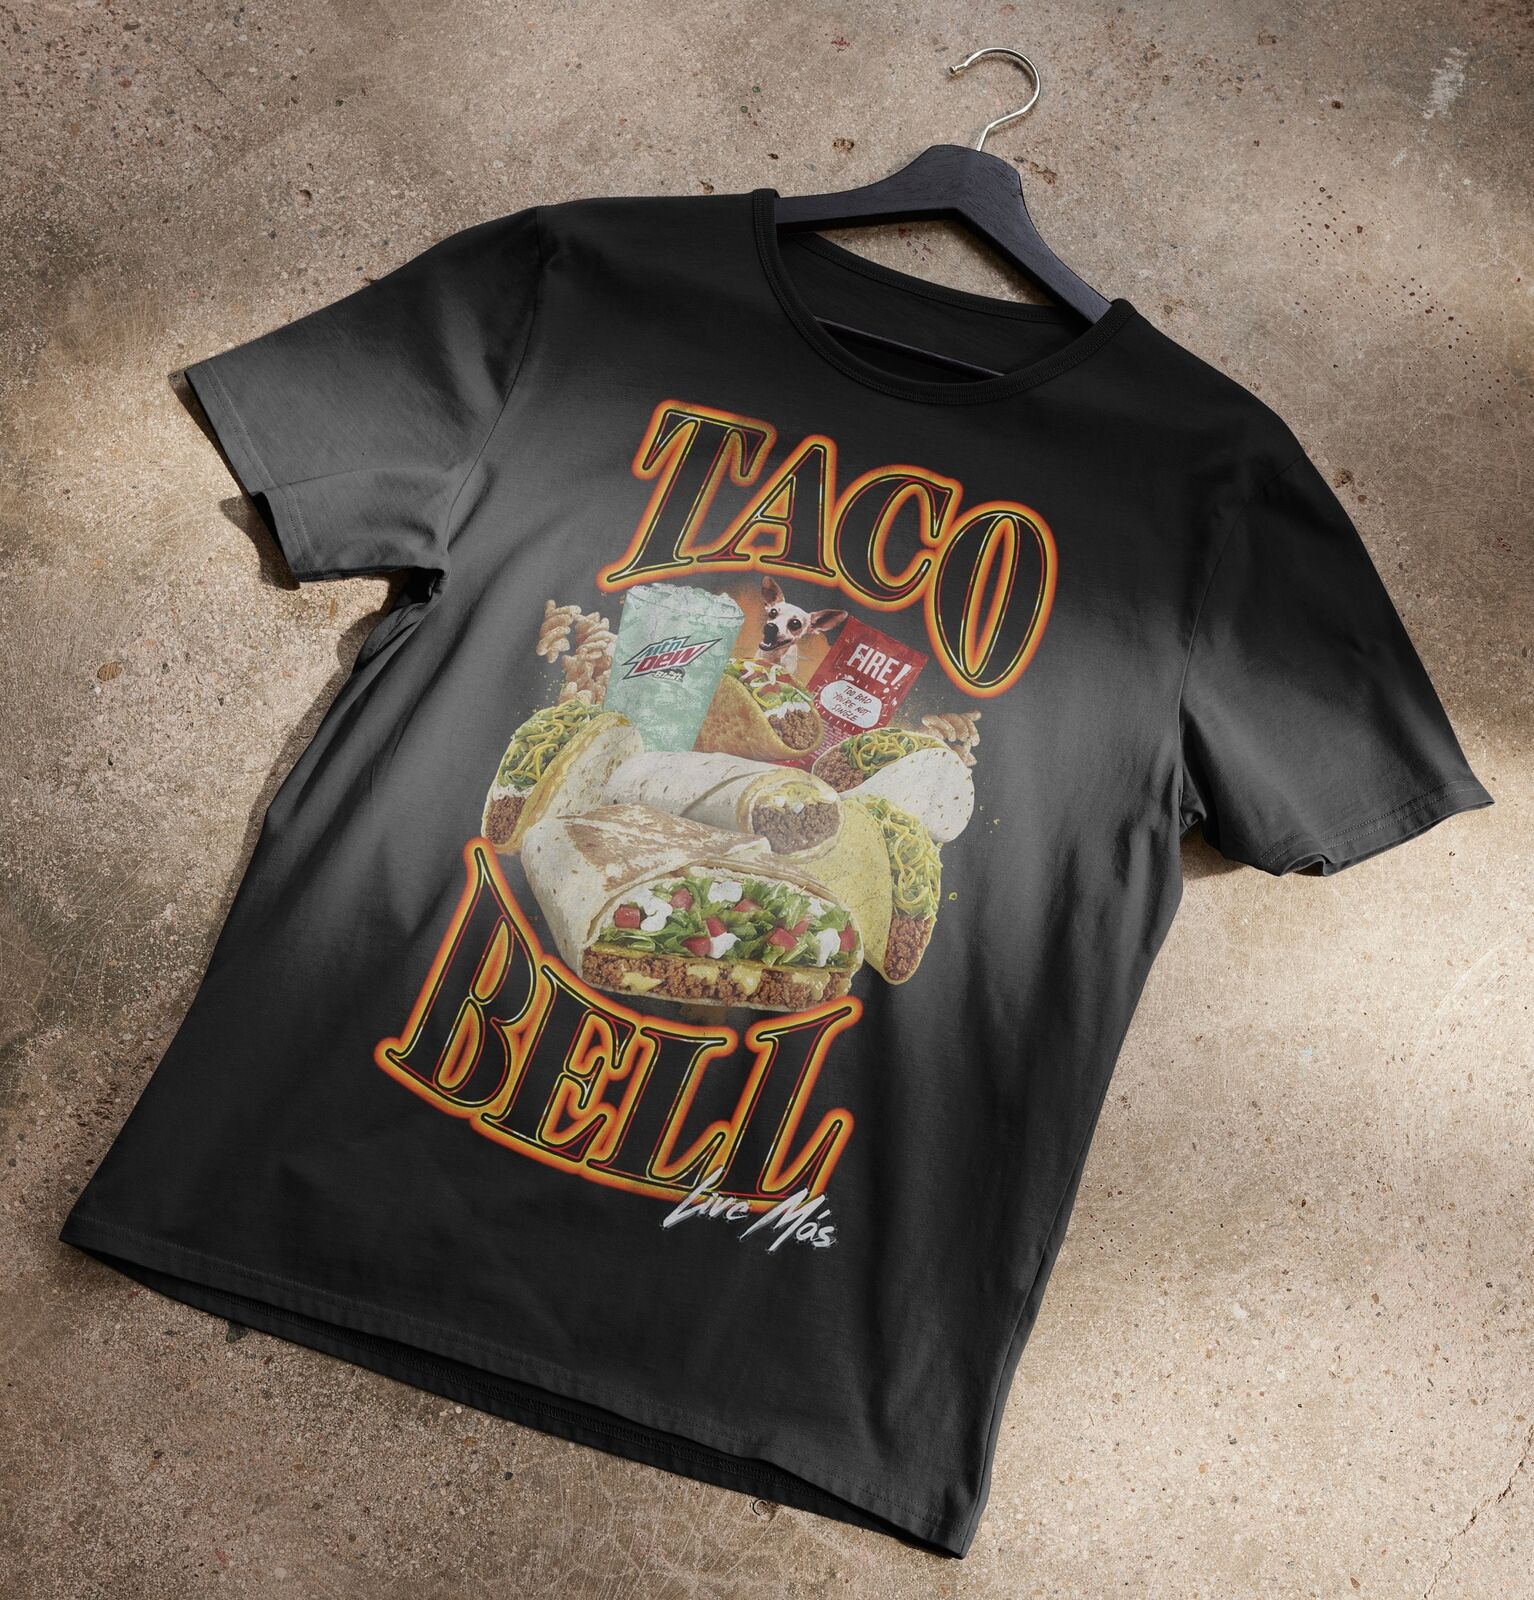 Taco Bell Chain Fast Food Restaurant Retro 90\'s Vintage T-Shirt, Size S-5Xl